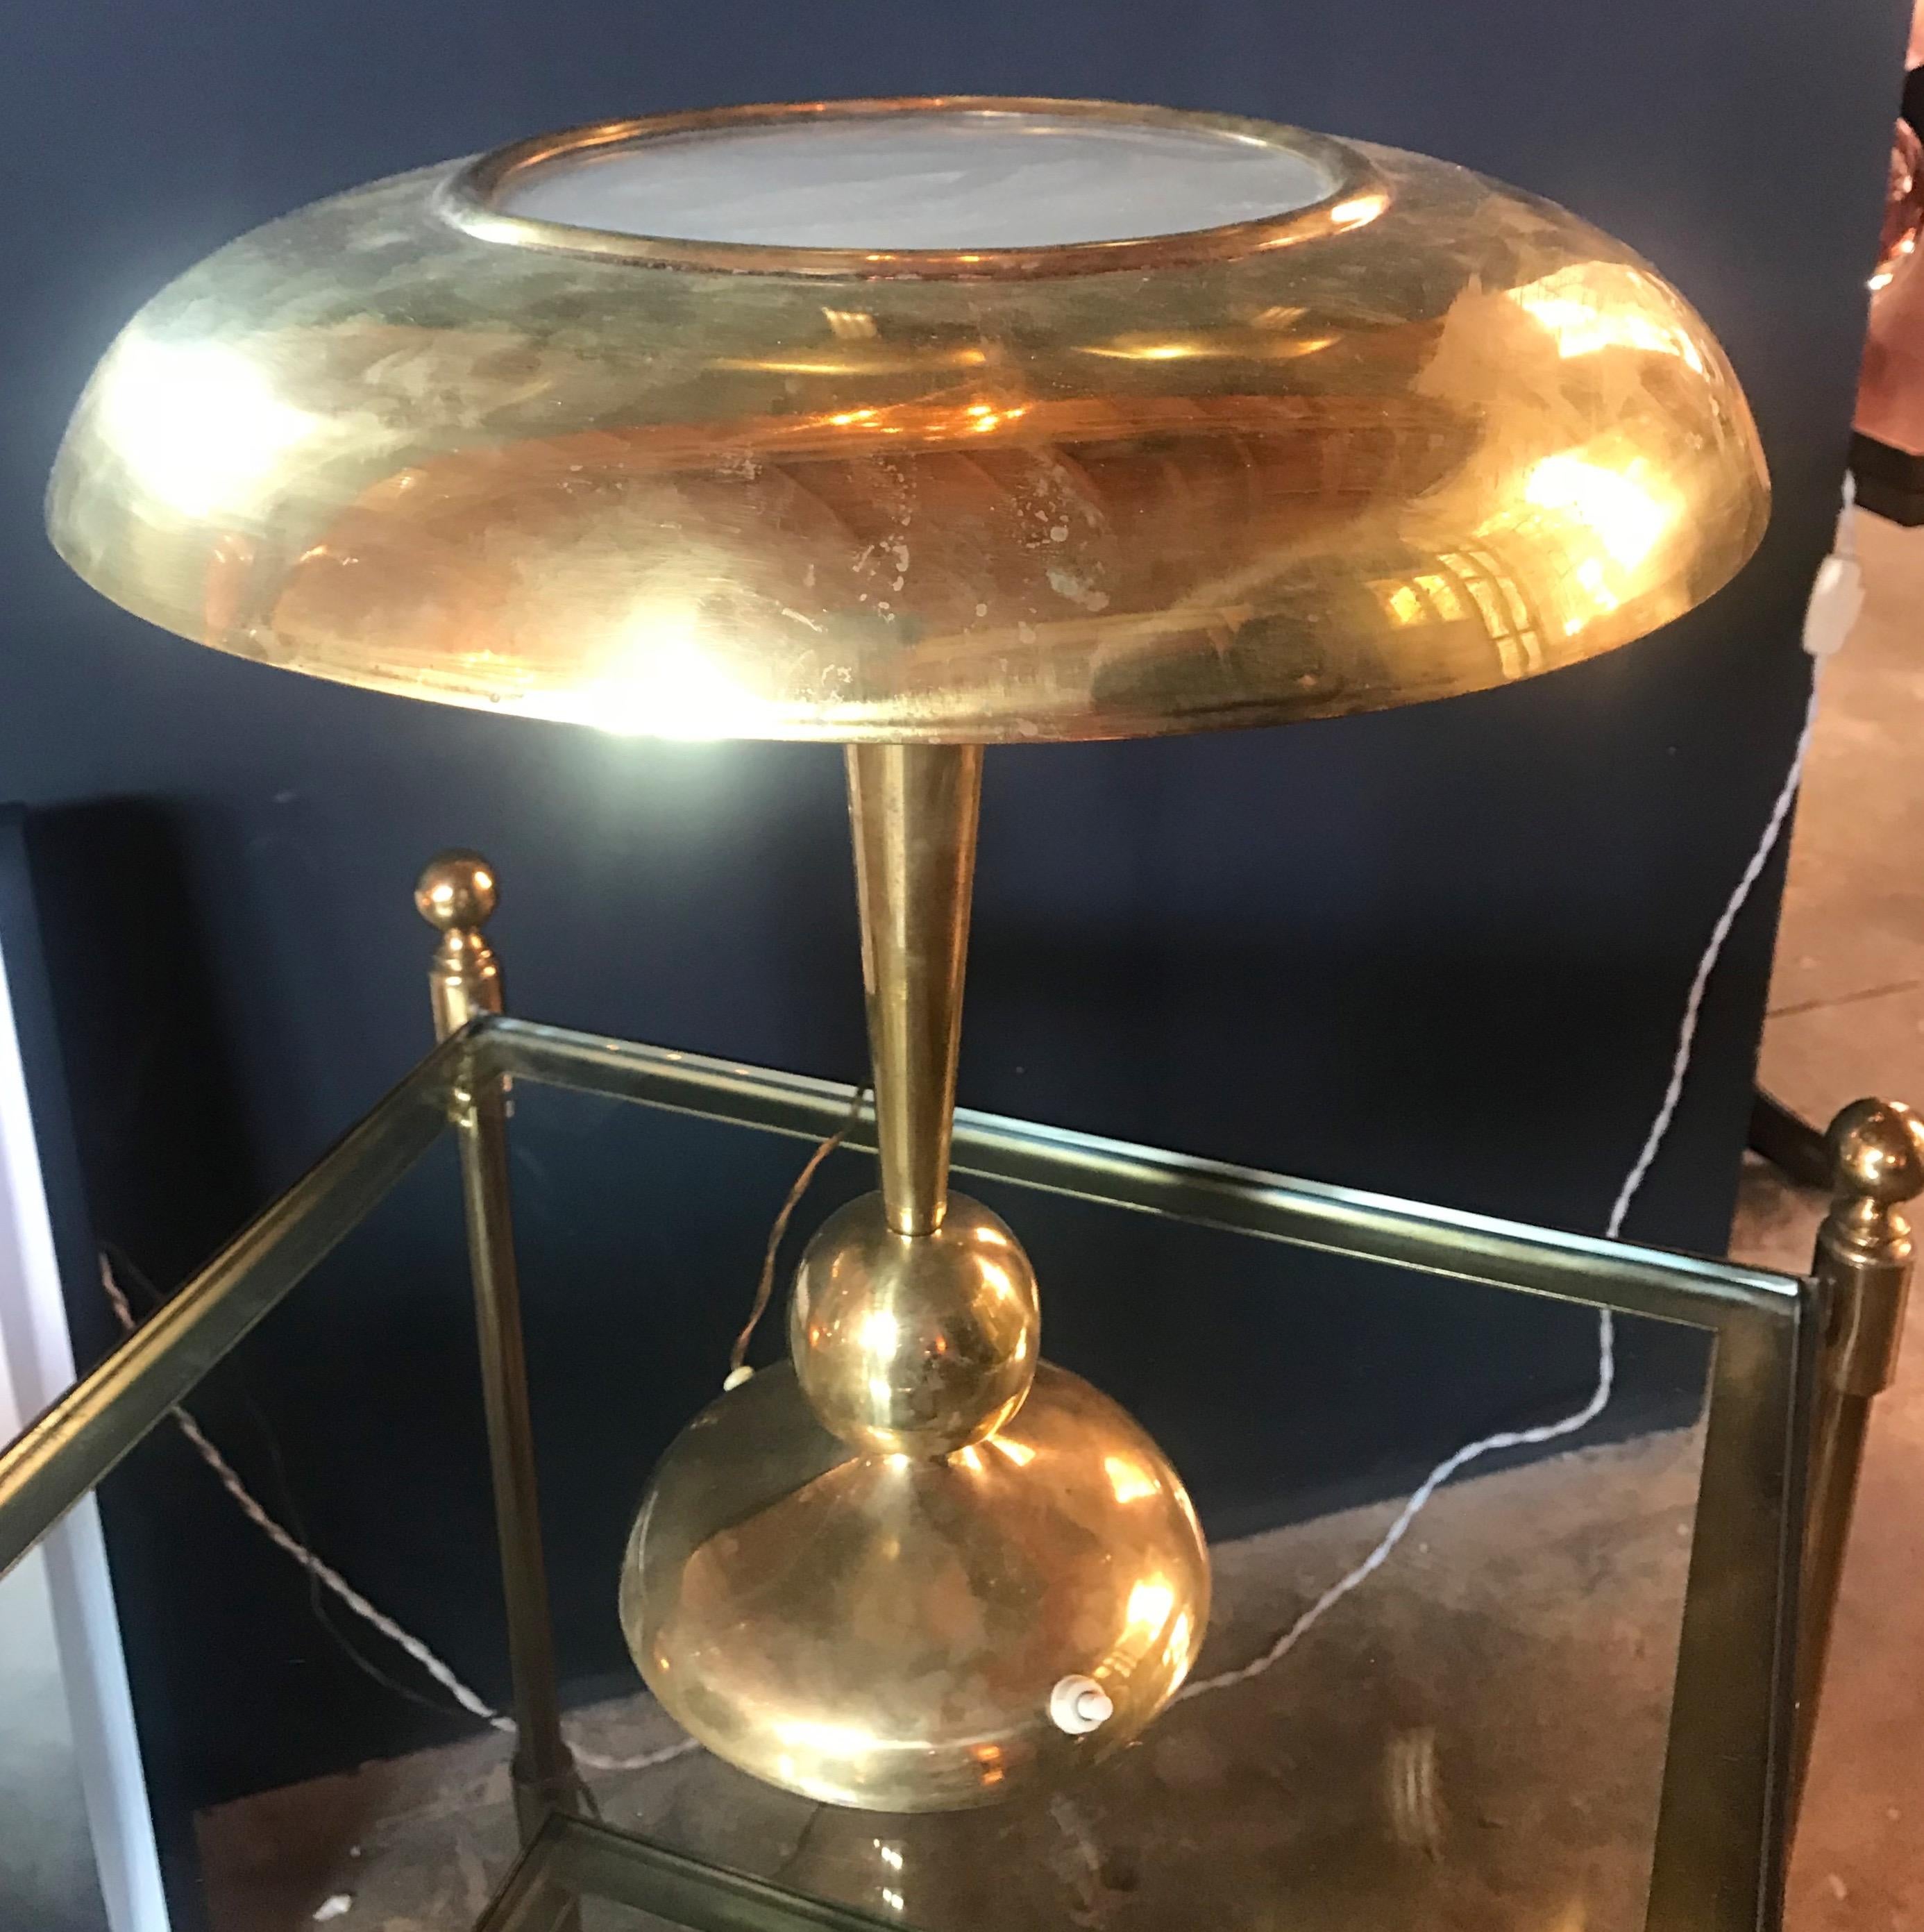 Oscar Torlasco solid brass table lamp with tilt swivel ball joint at base, Italy, 1950s.
 